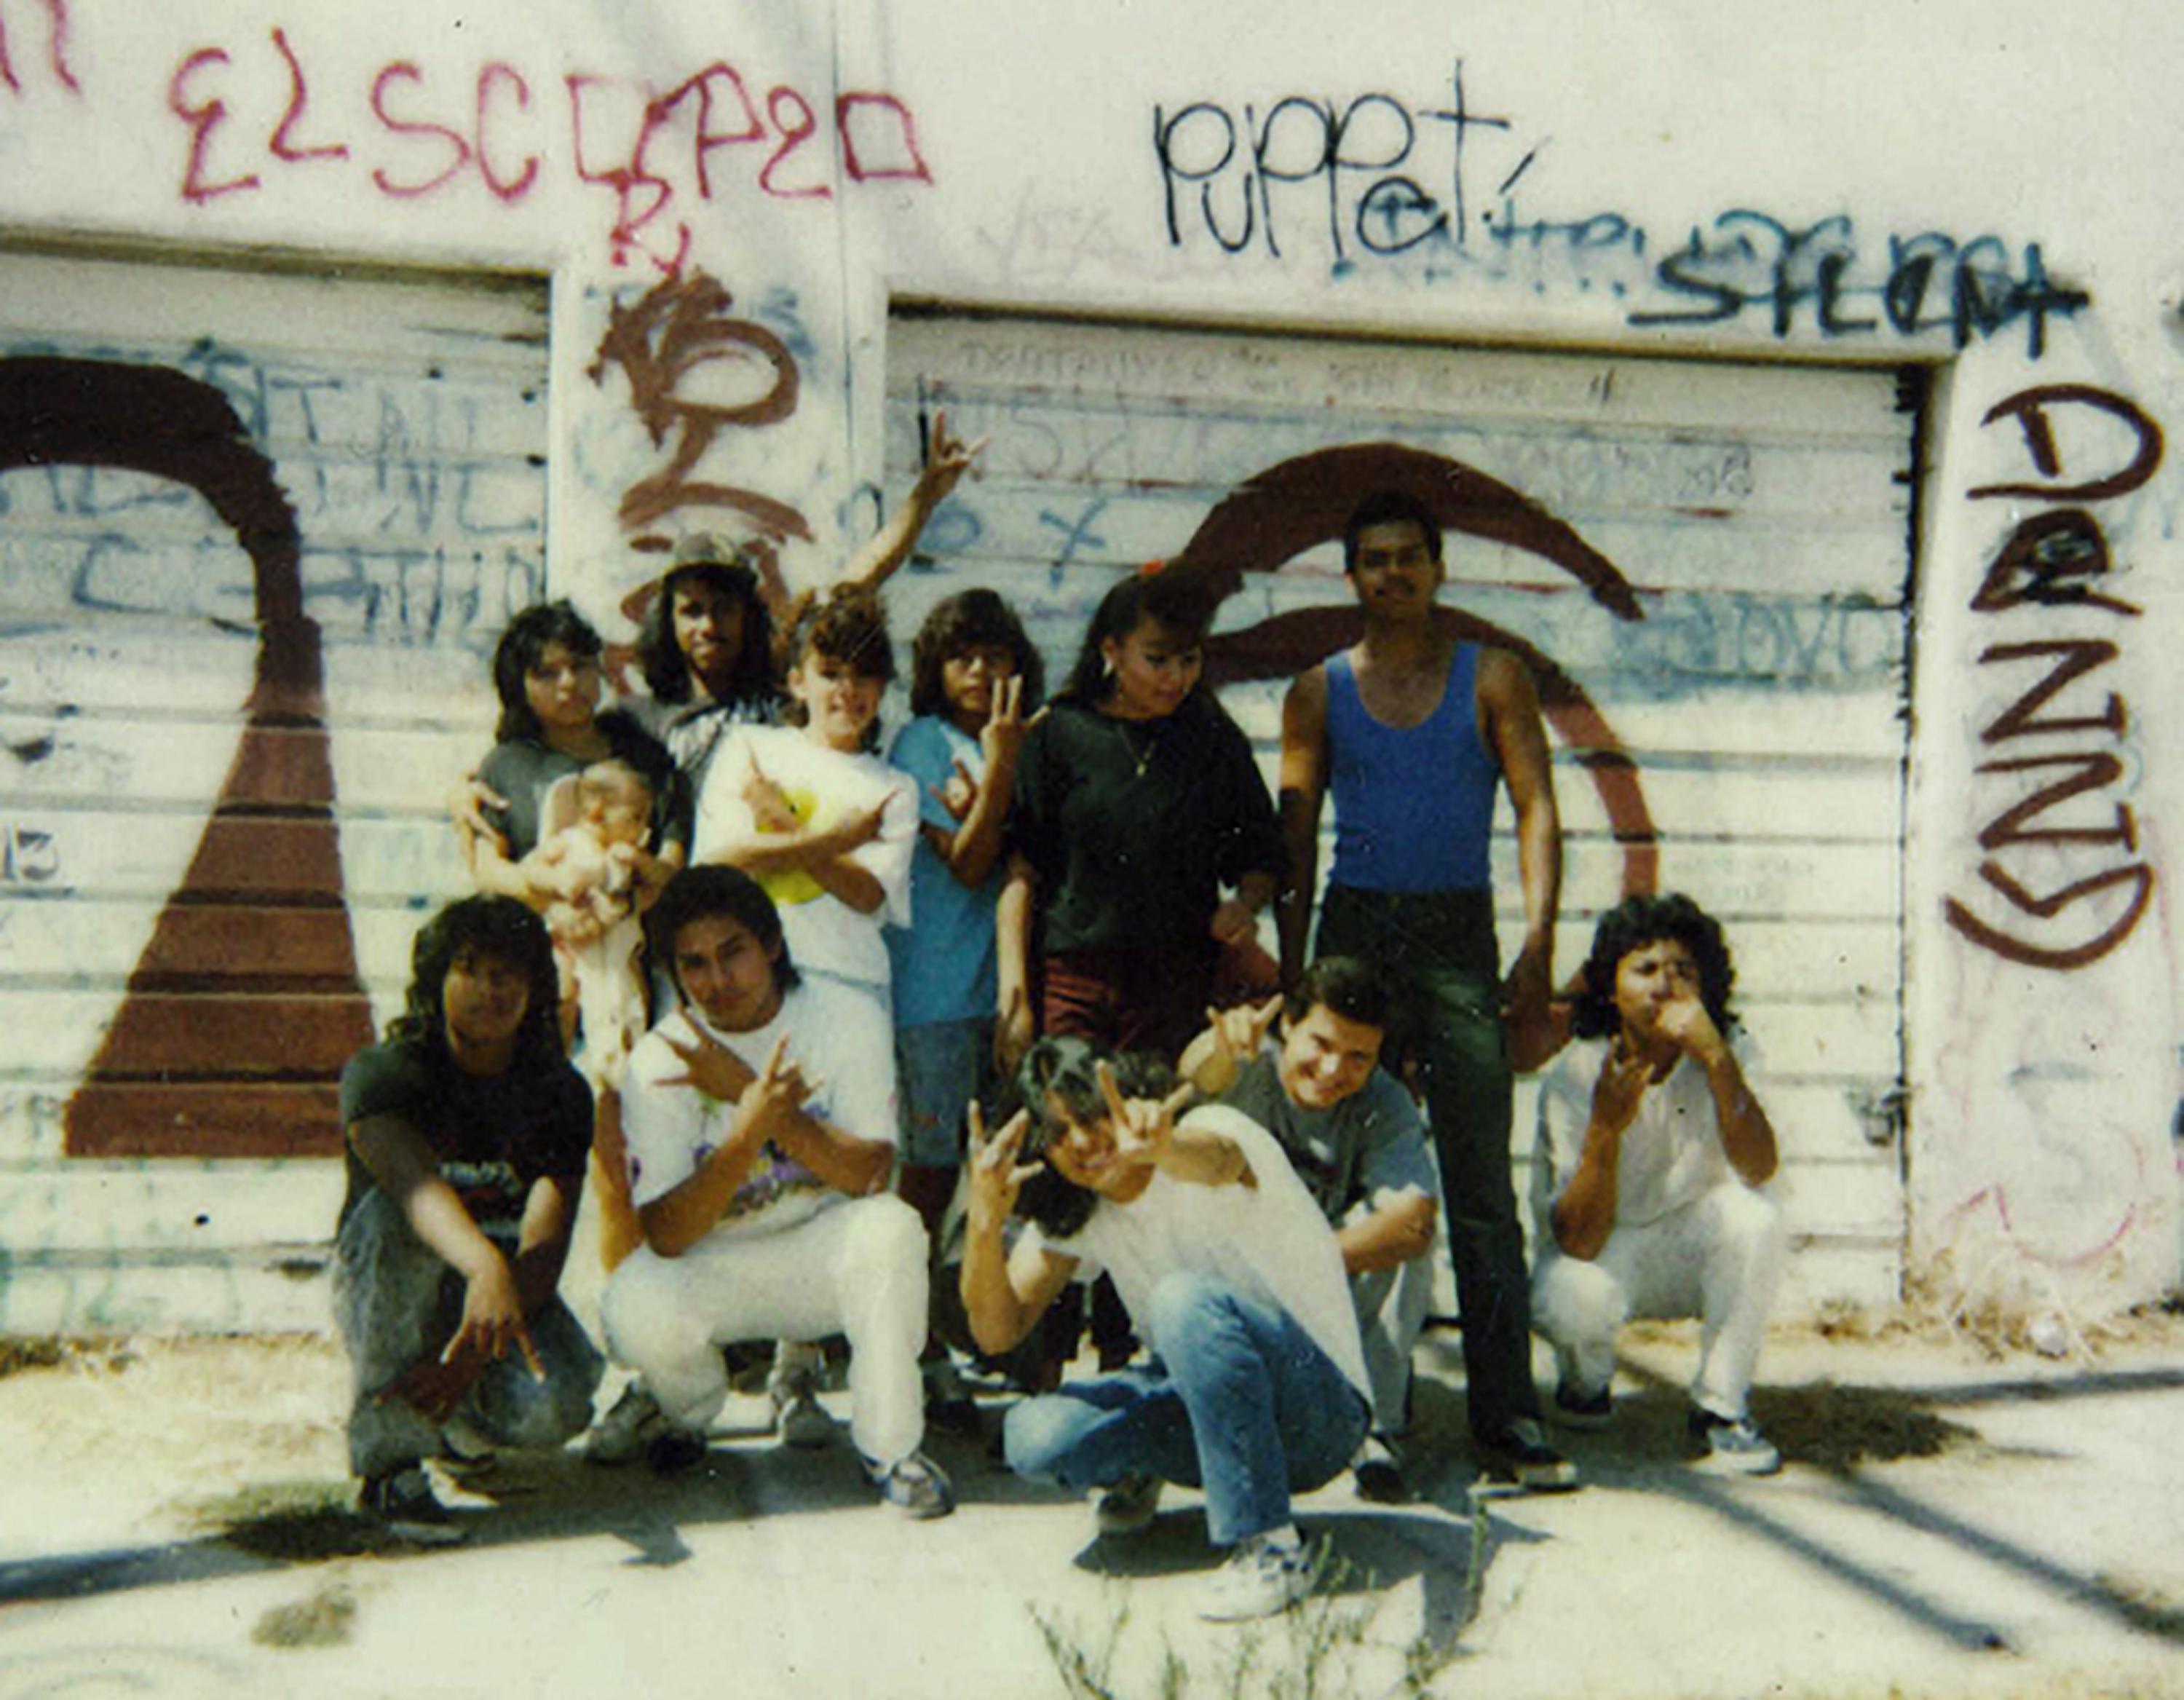 Members of the Western Locos clique of the Mara Salvatrucha in the mid-80s in Los Angeles. One of them, Puppet, returned years later to El Salvador and lived in the Amatepec colonia in San Salvador, where he was eventually murdered.